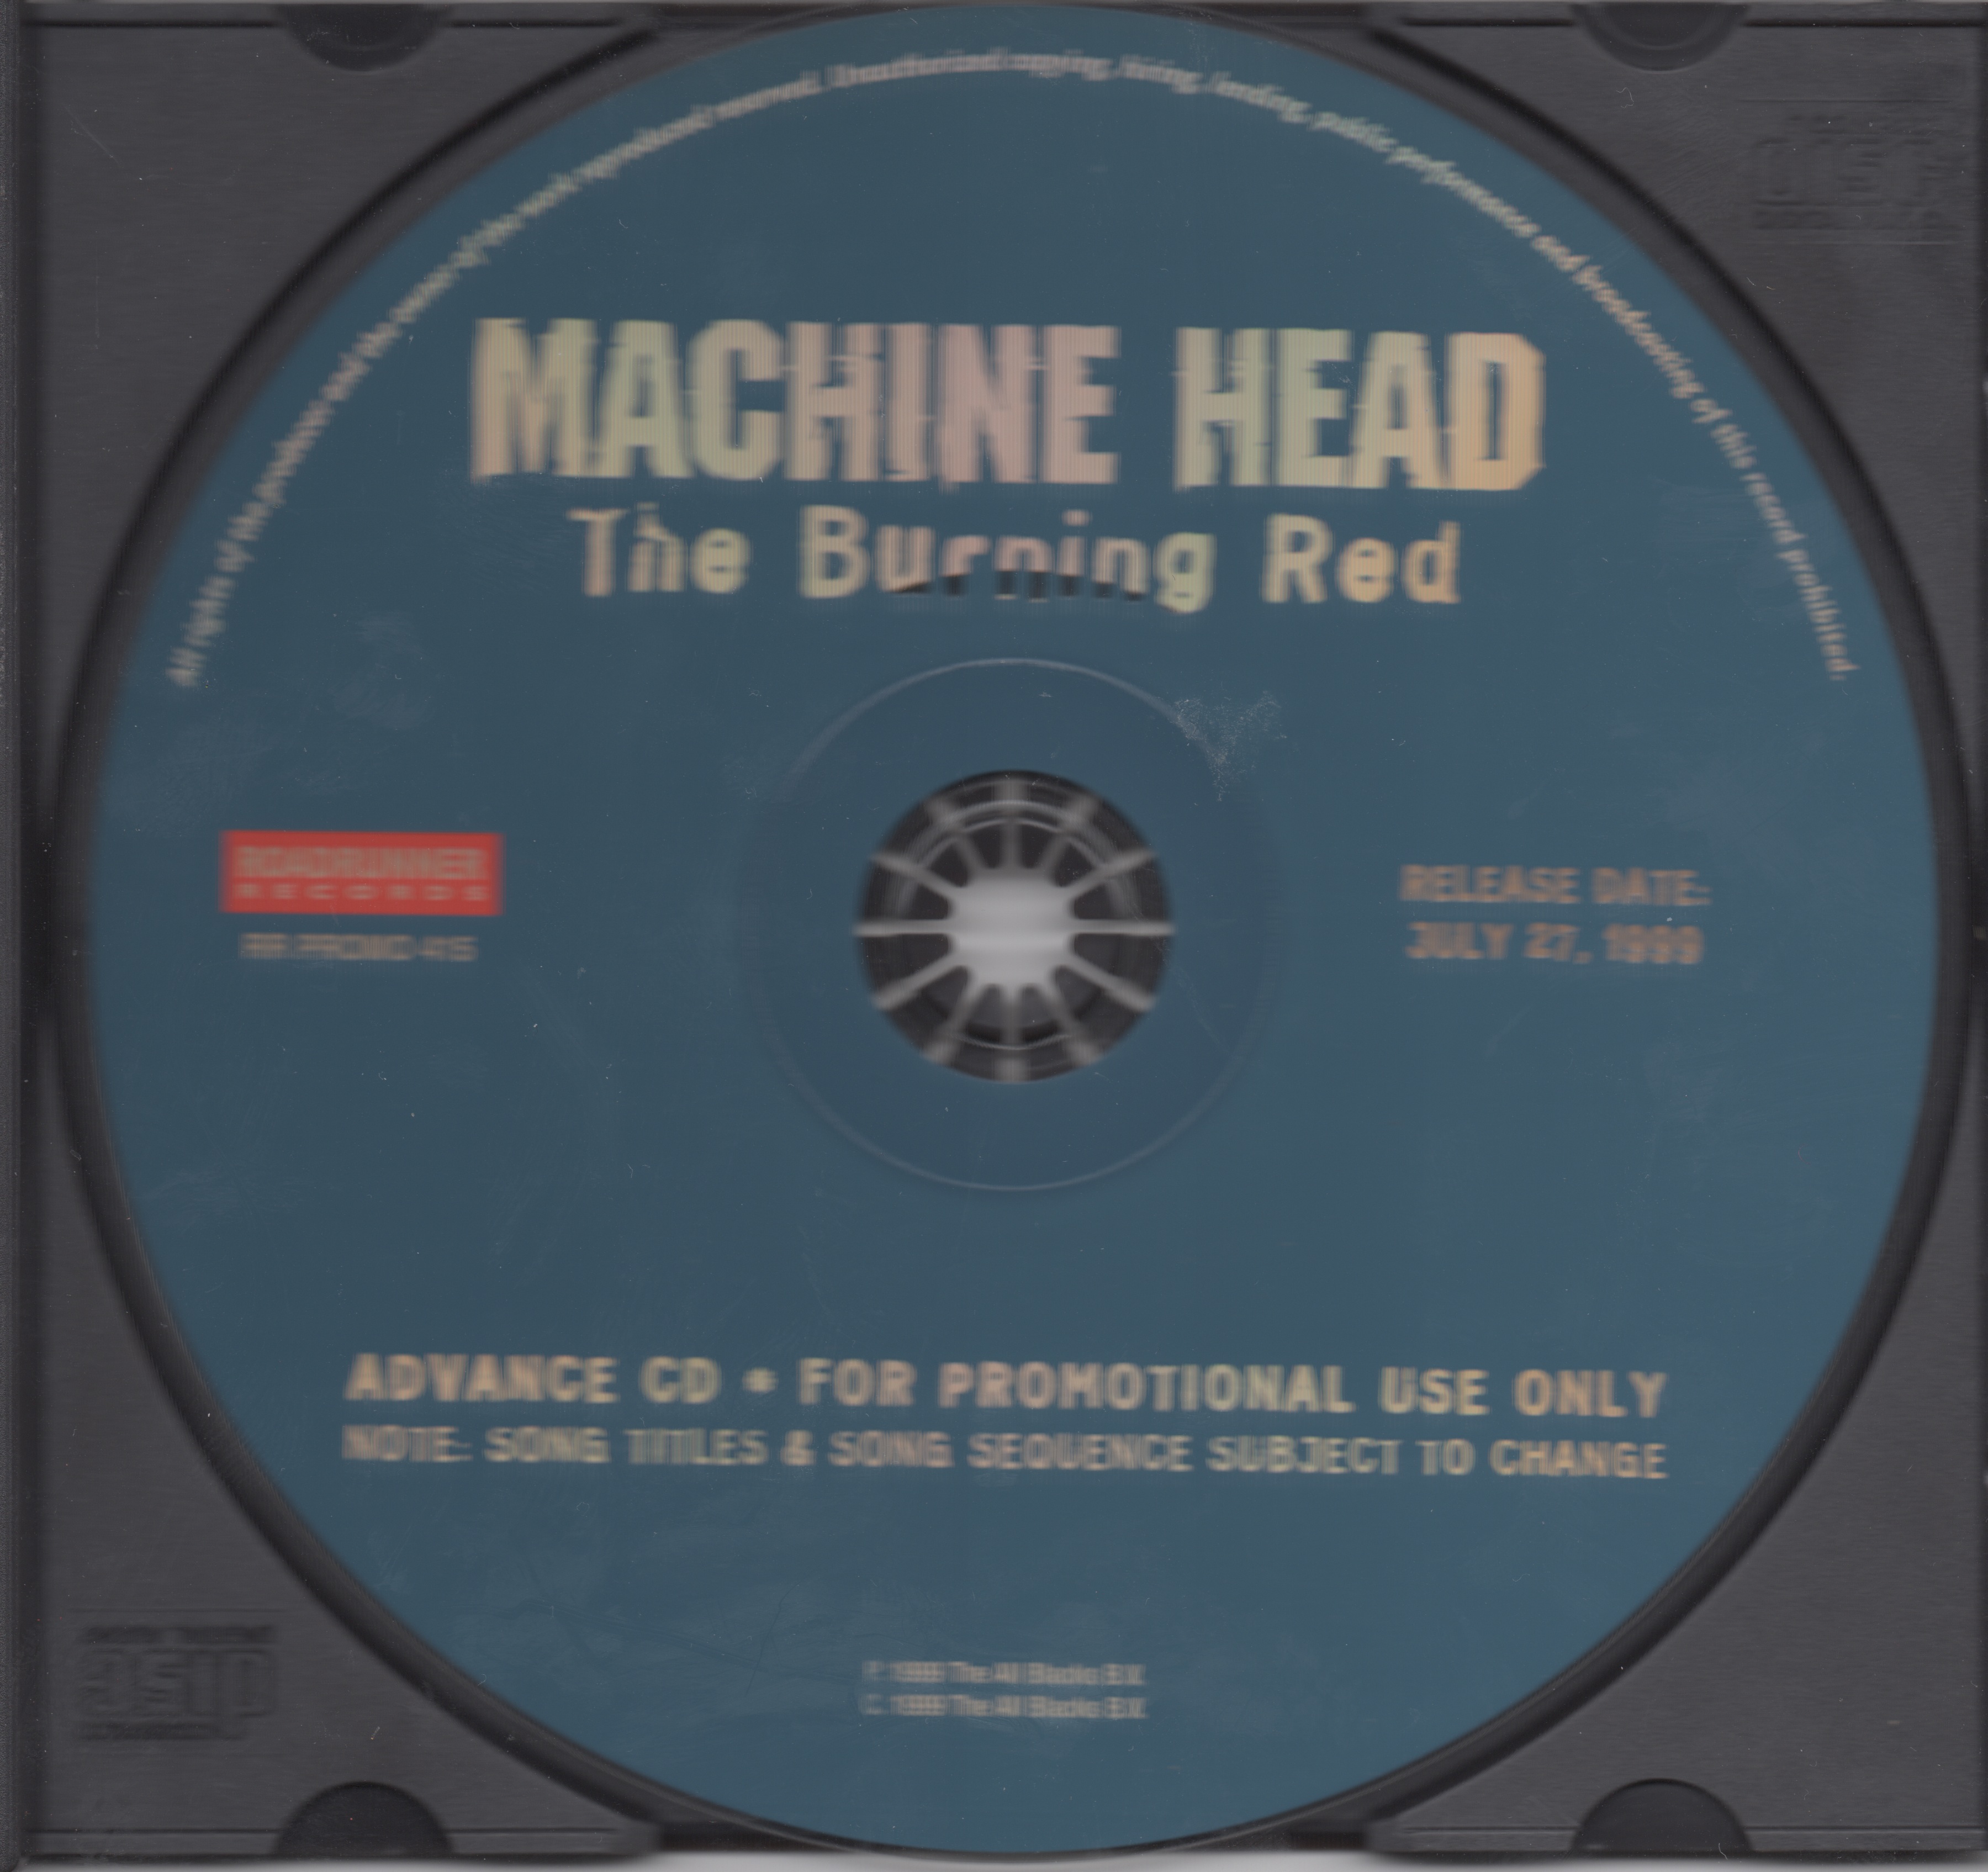 The Buring Red Advance CD DiscD